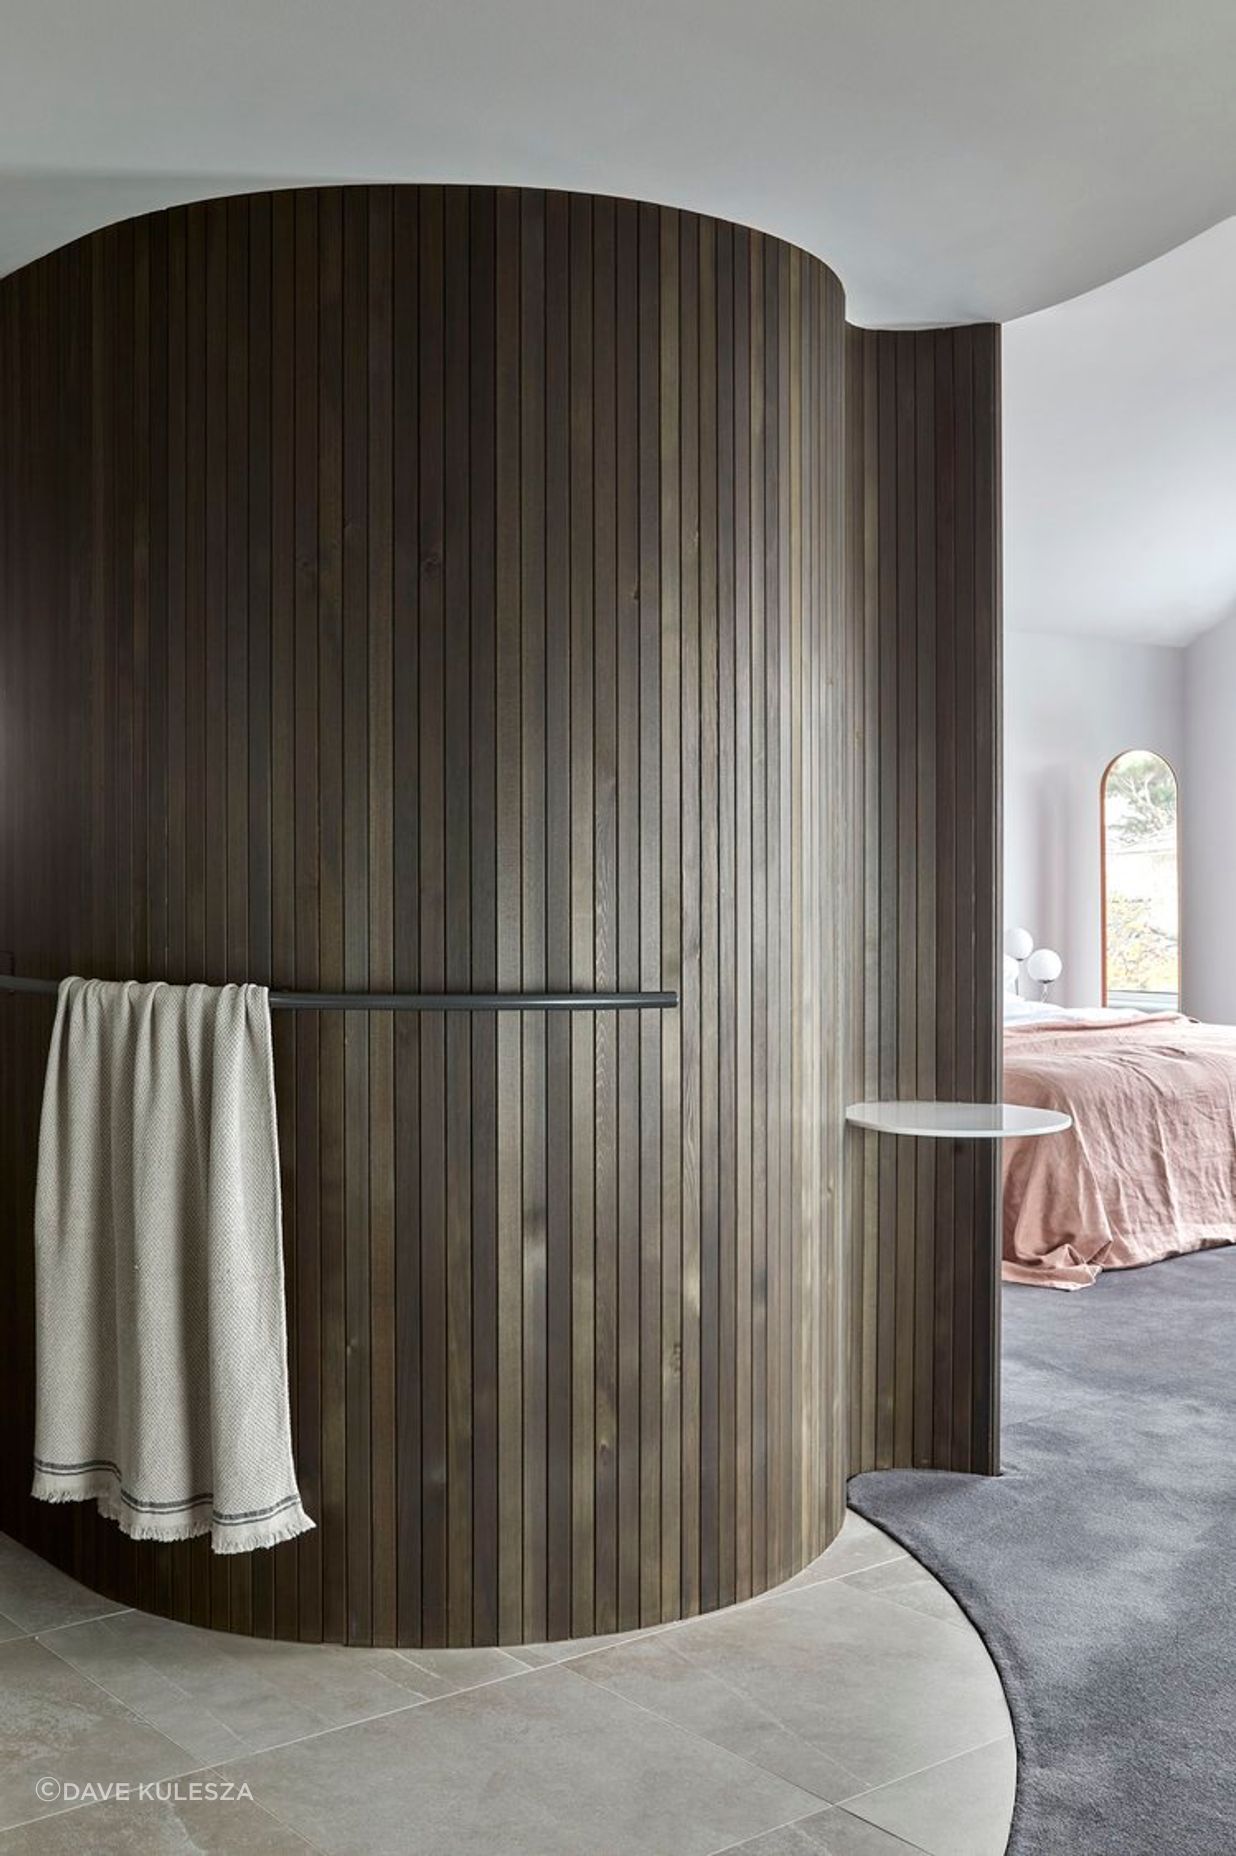 The curved wall of the sauna in the bedroom suite.